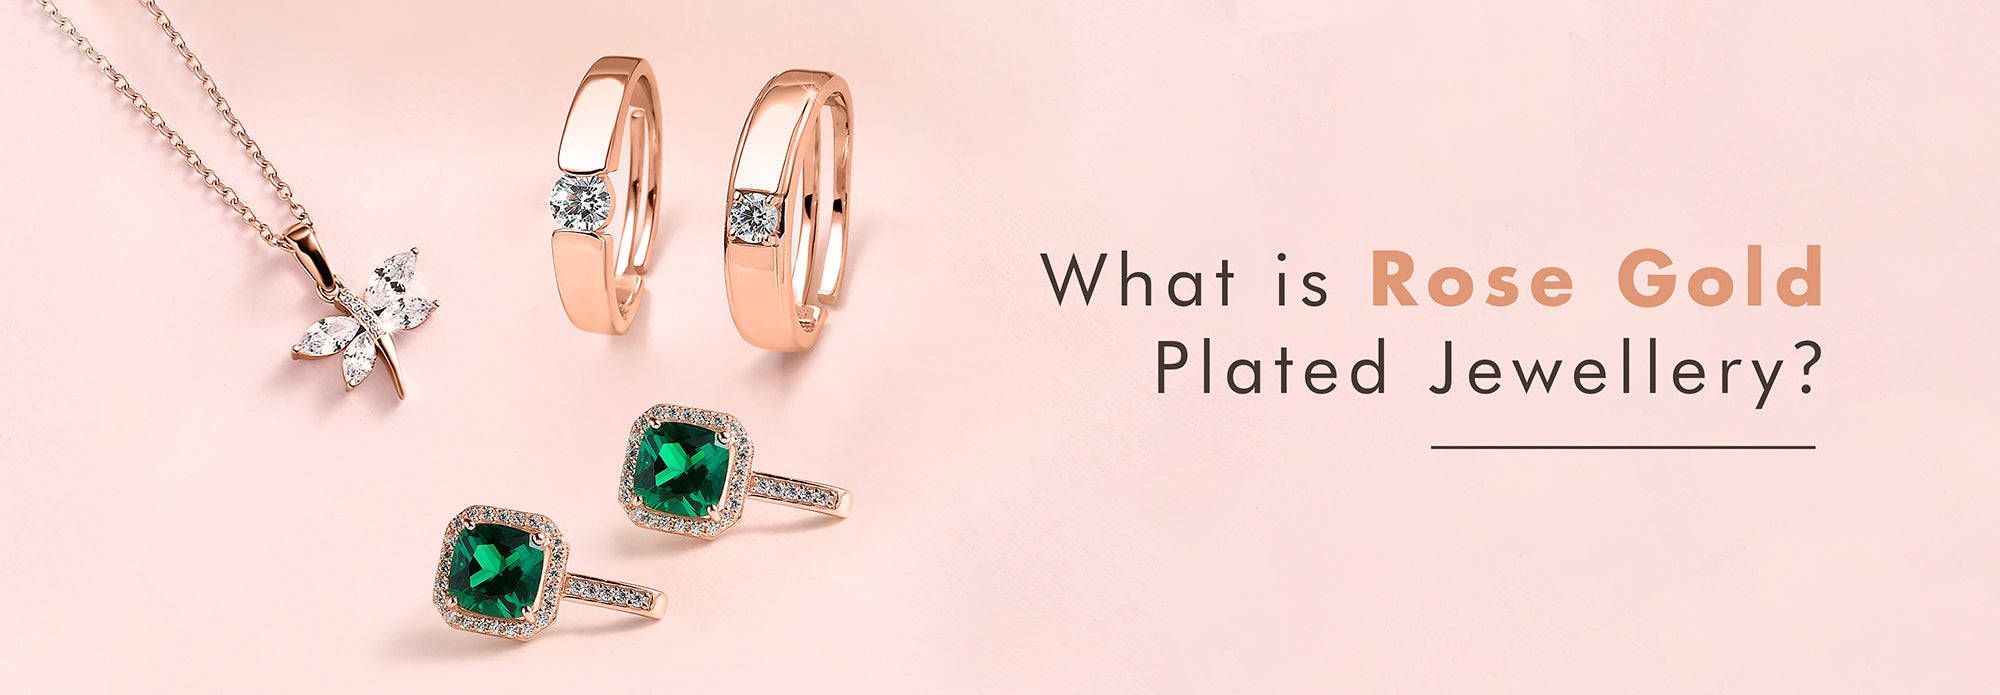 What Is Rose Gold Plated Jewellery?